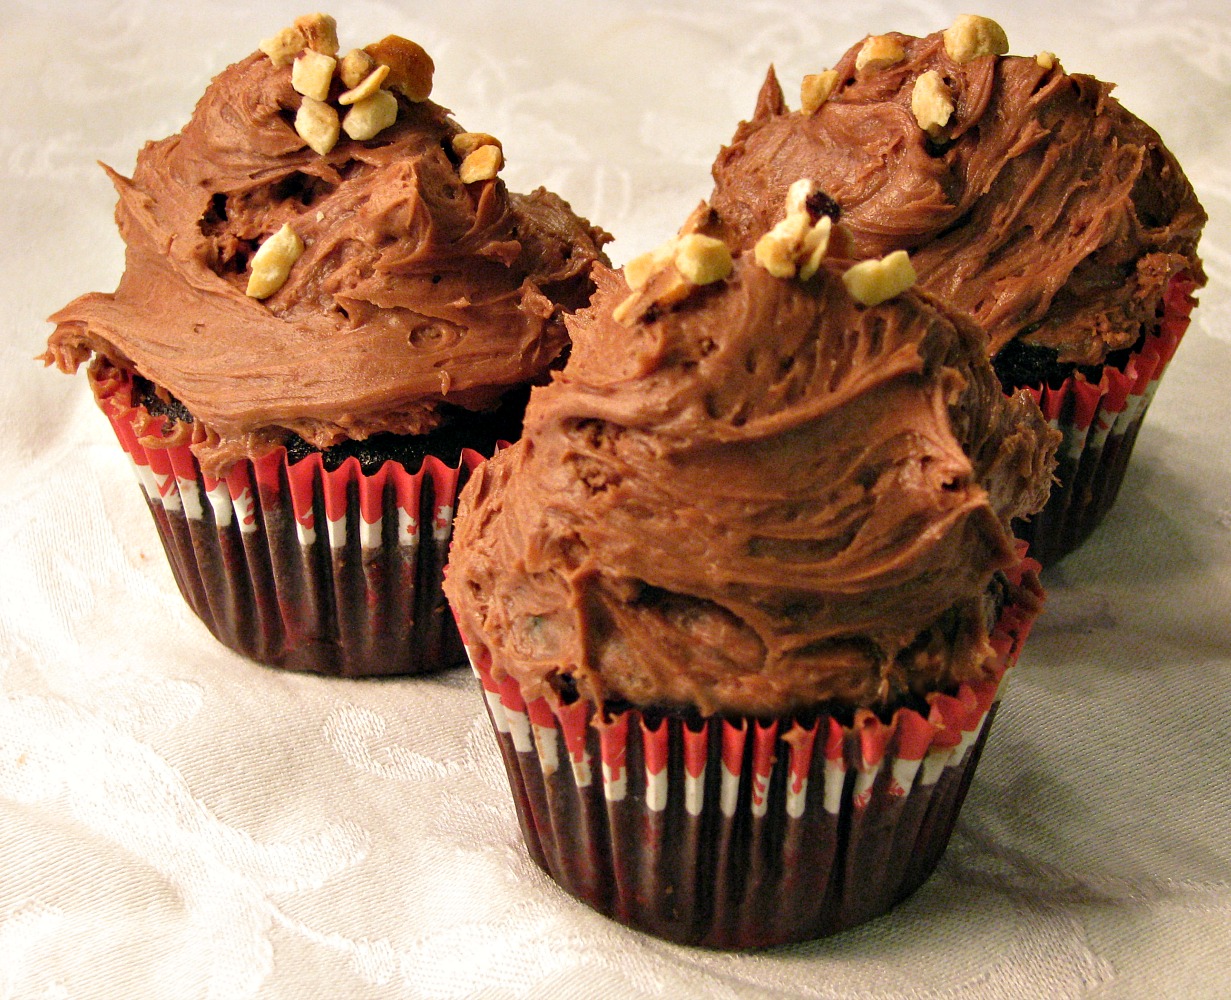 Chocolate Hazelnut Cupcakes with Nutella Frosting